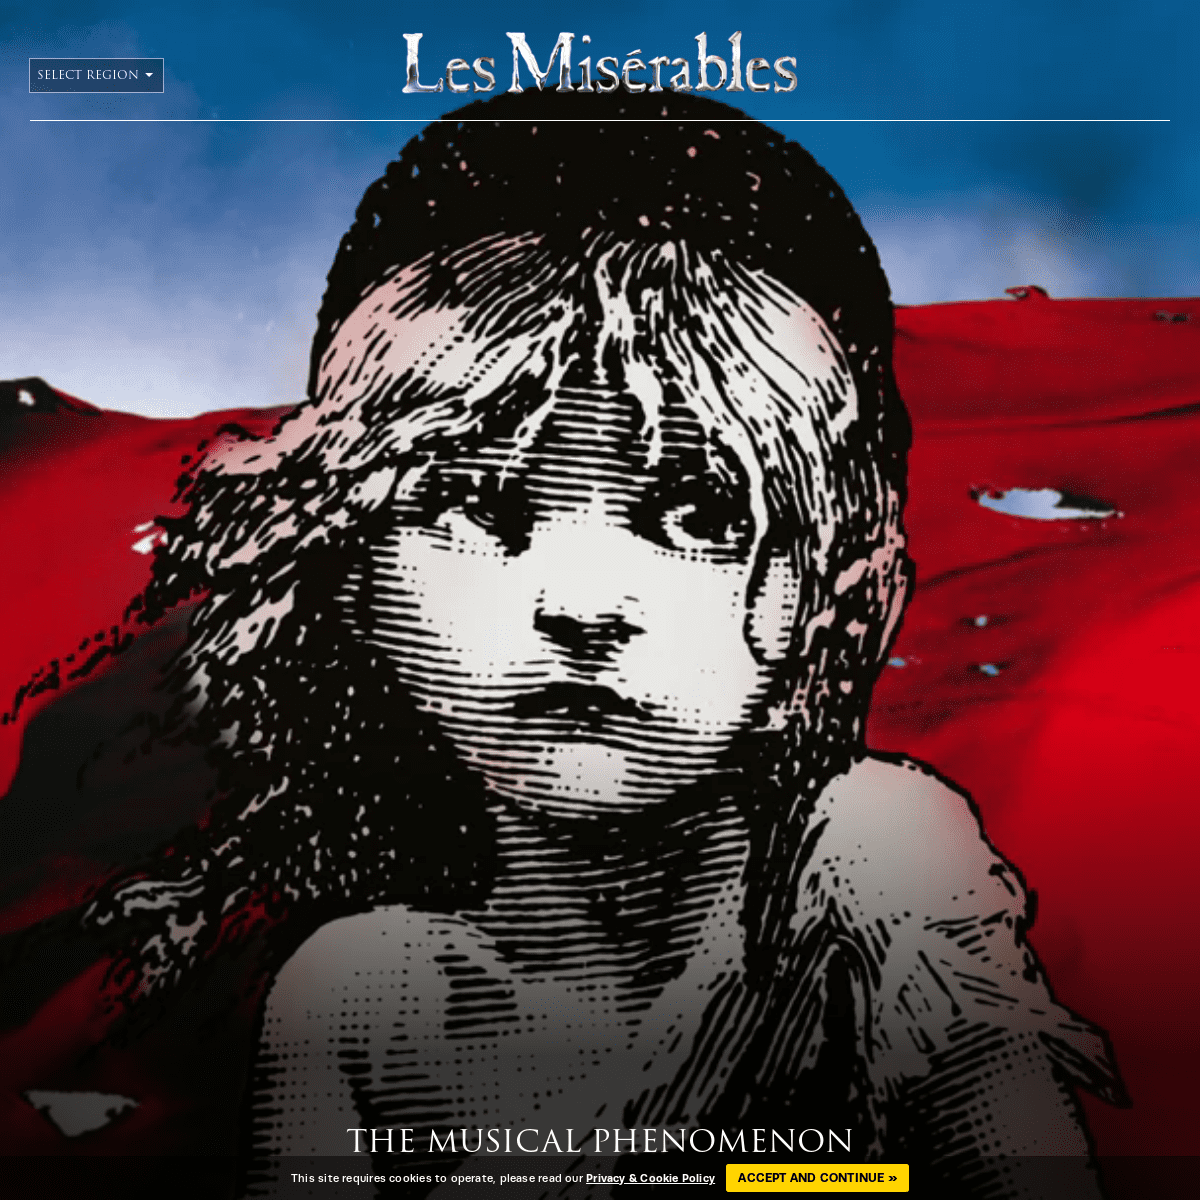 Les Misérables | Welcome to the Official Website